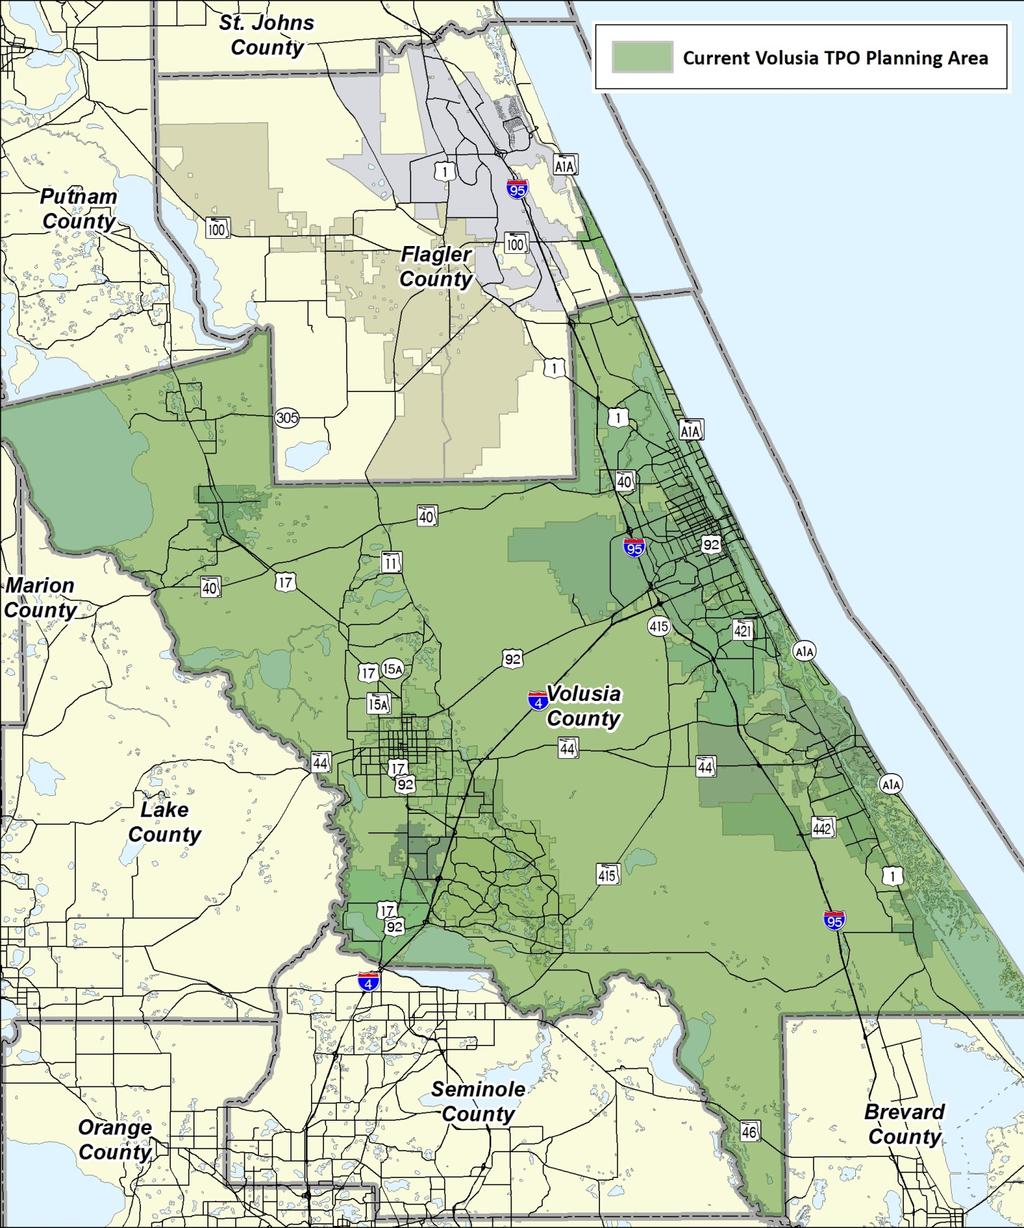 Ormond Beach, Pierson, Ponce Inlet, Port Orange, and South Daytona, as well as Beverly Beach Flagler Beach in Flagler County. (See Figure 2, page 4.